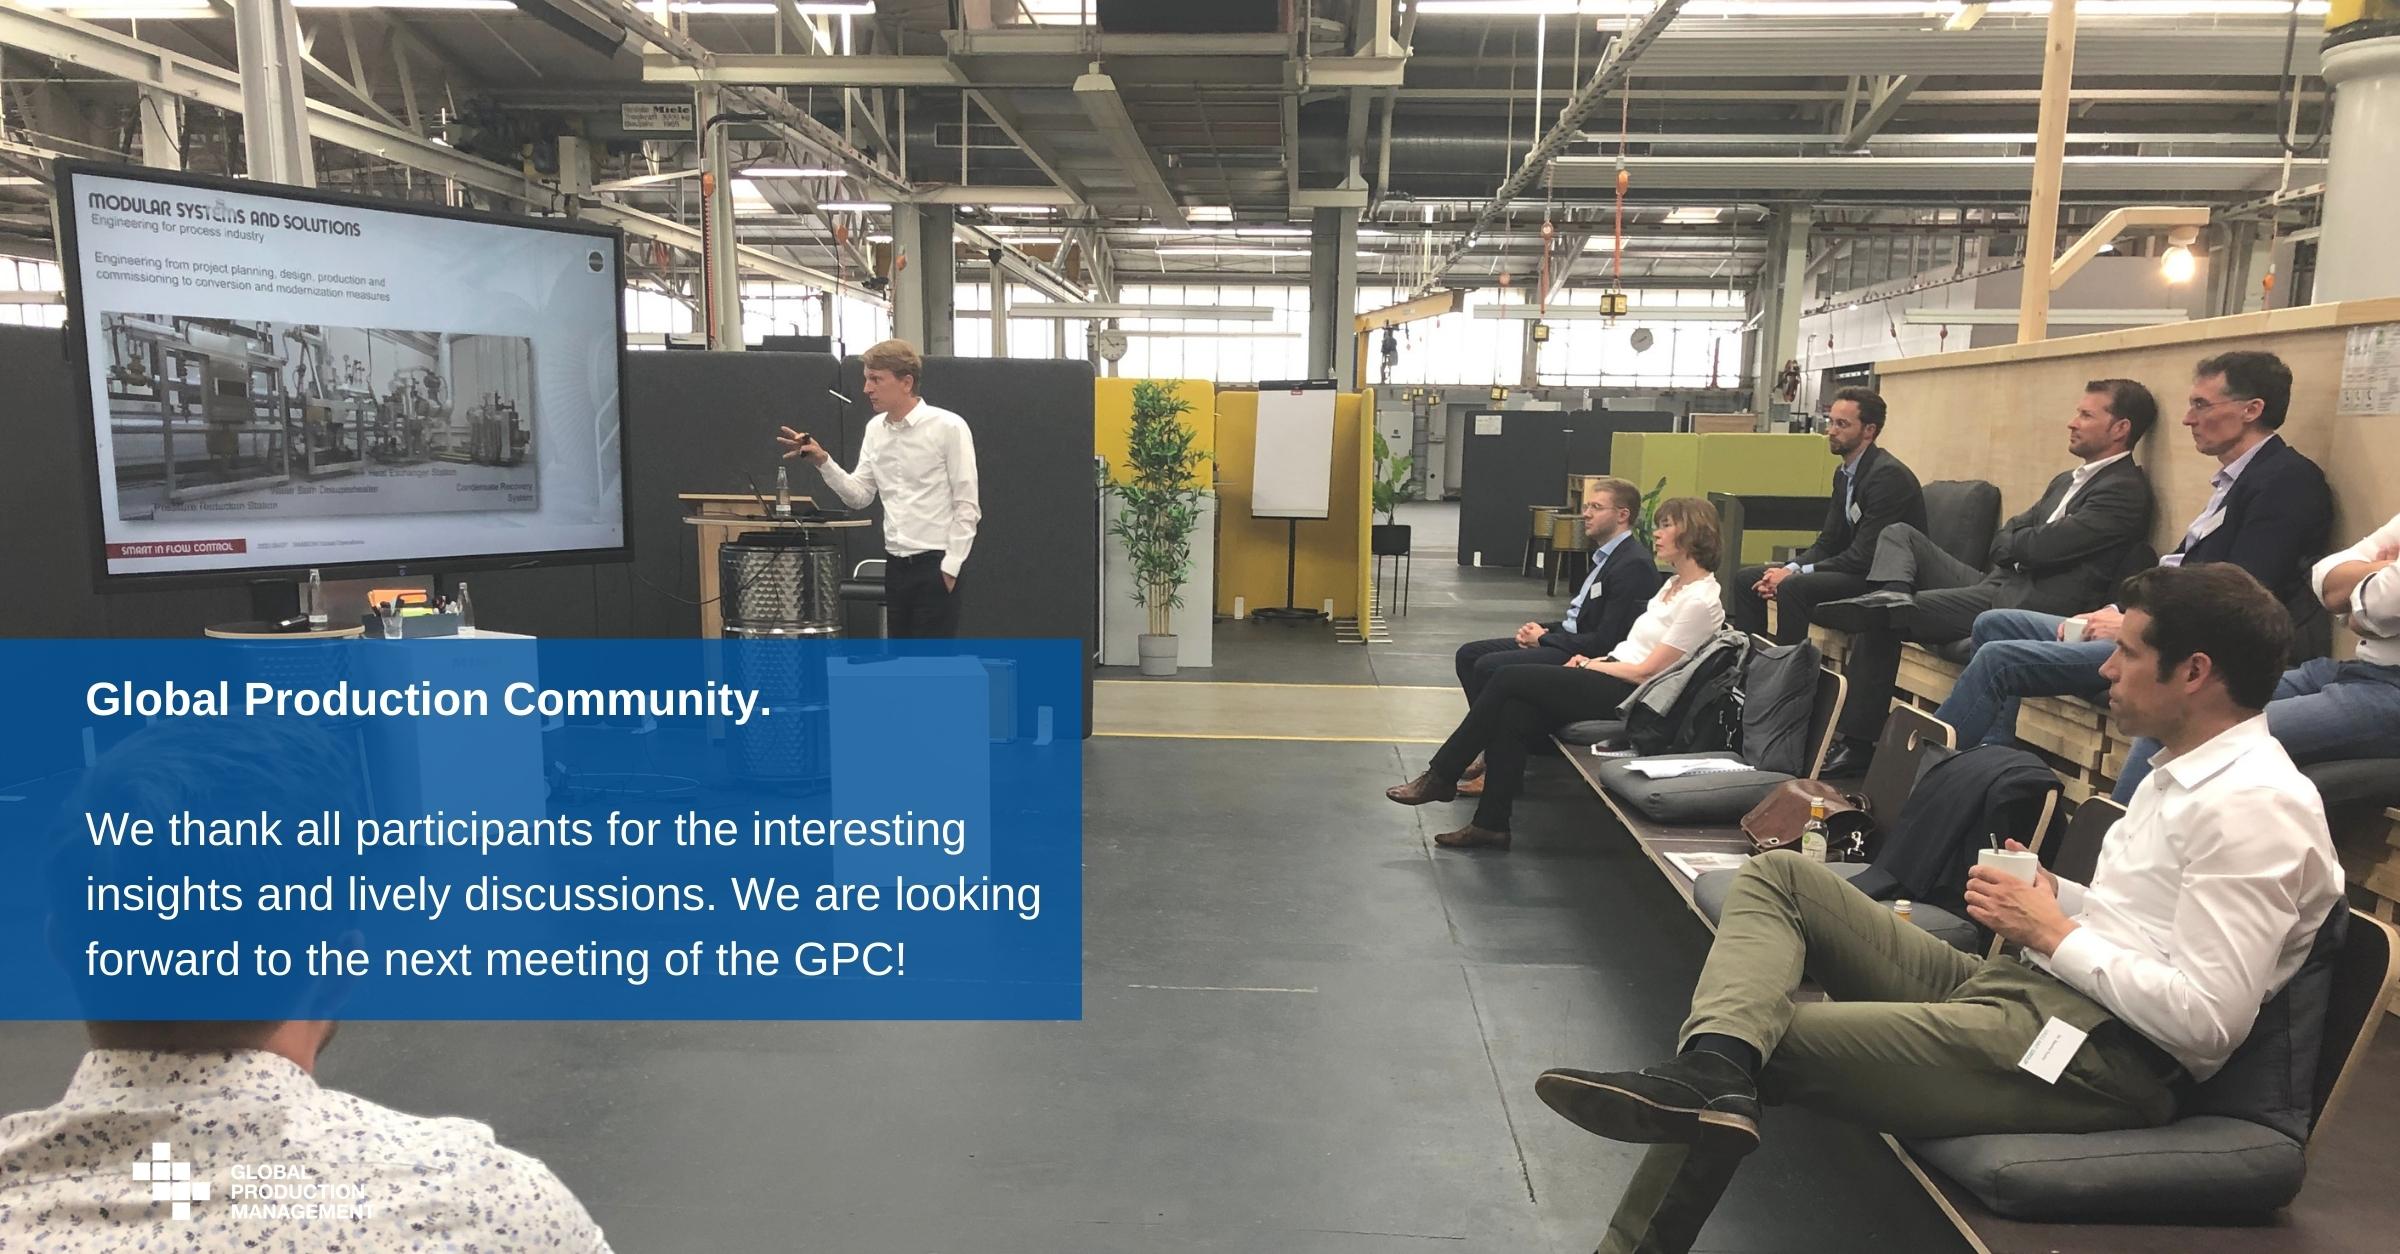 We-thank-all-participants-for-the-interesting-insights-and-lively-discussions.-We-are-looking-forward-to-the-next-meeting-of-the-GPC Meeting of the Global Production Community  